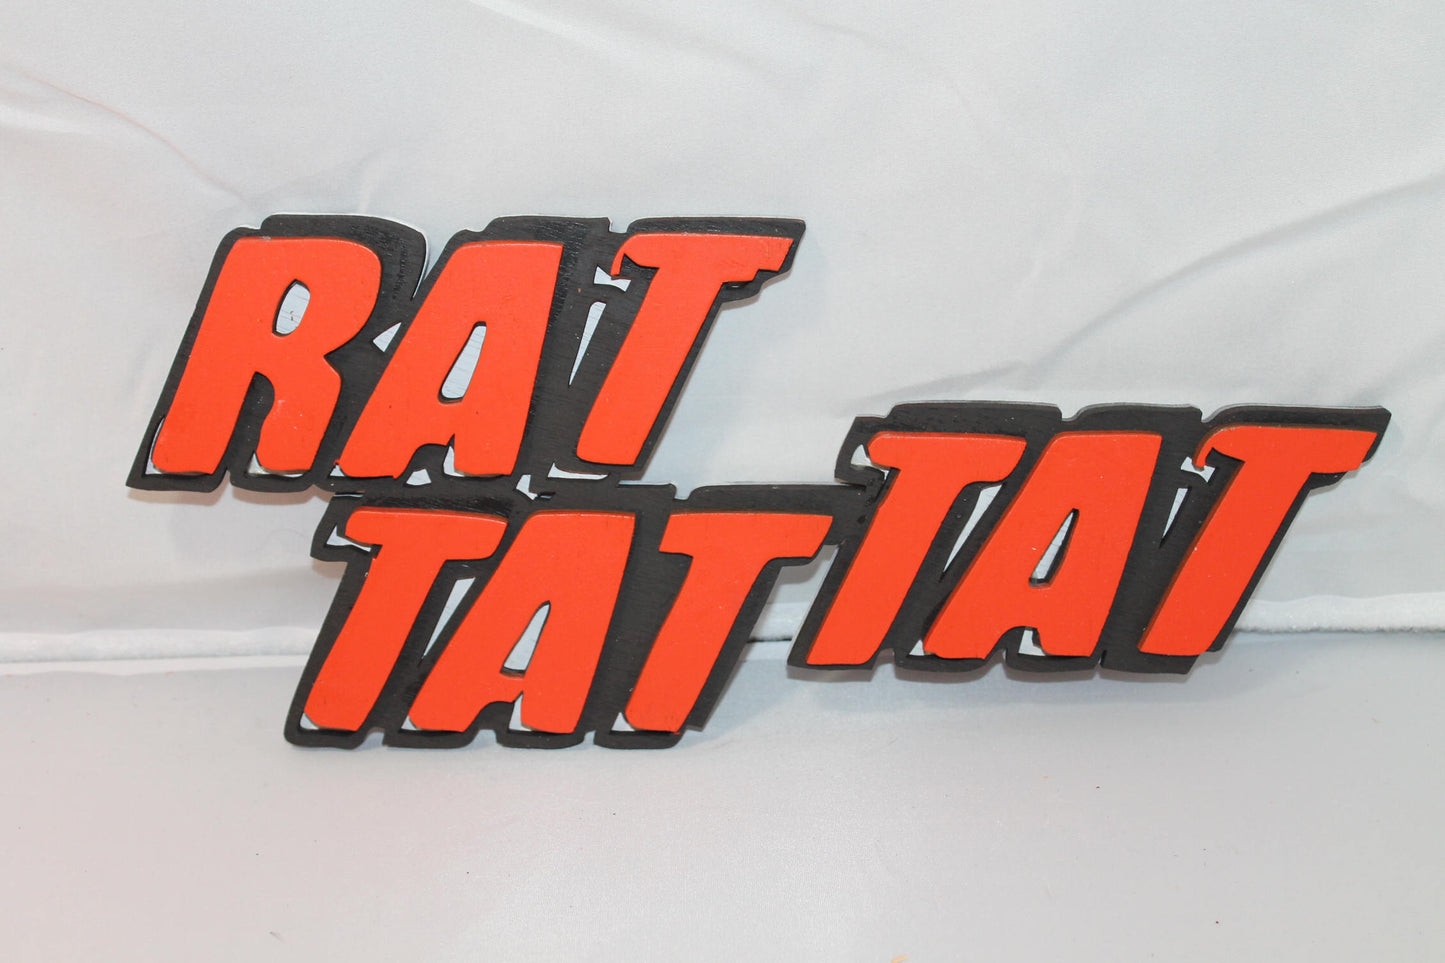 Rat Tat Tat, Comic Book Word of Action, Sound Effect, Super Hero, Sign, Wooden Words, Laser Cut Out, Wood Cut Out,Footstepsinthepast